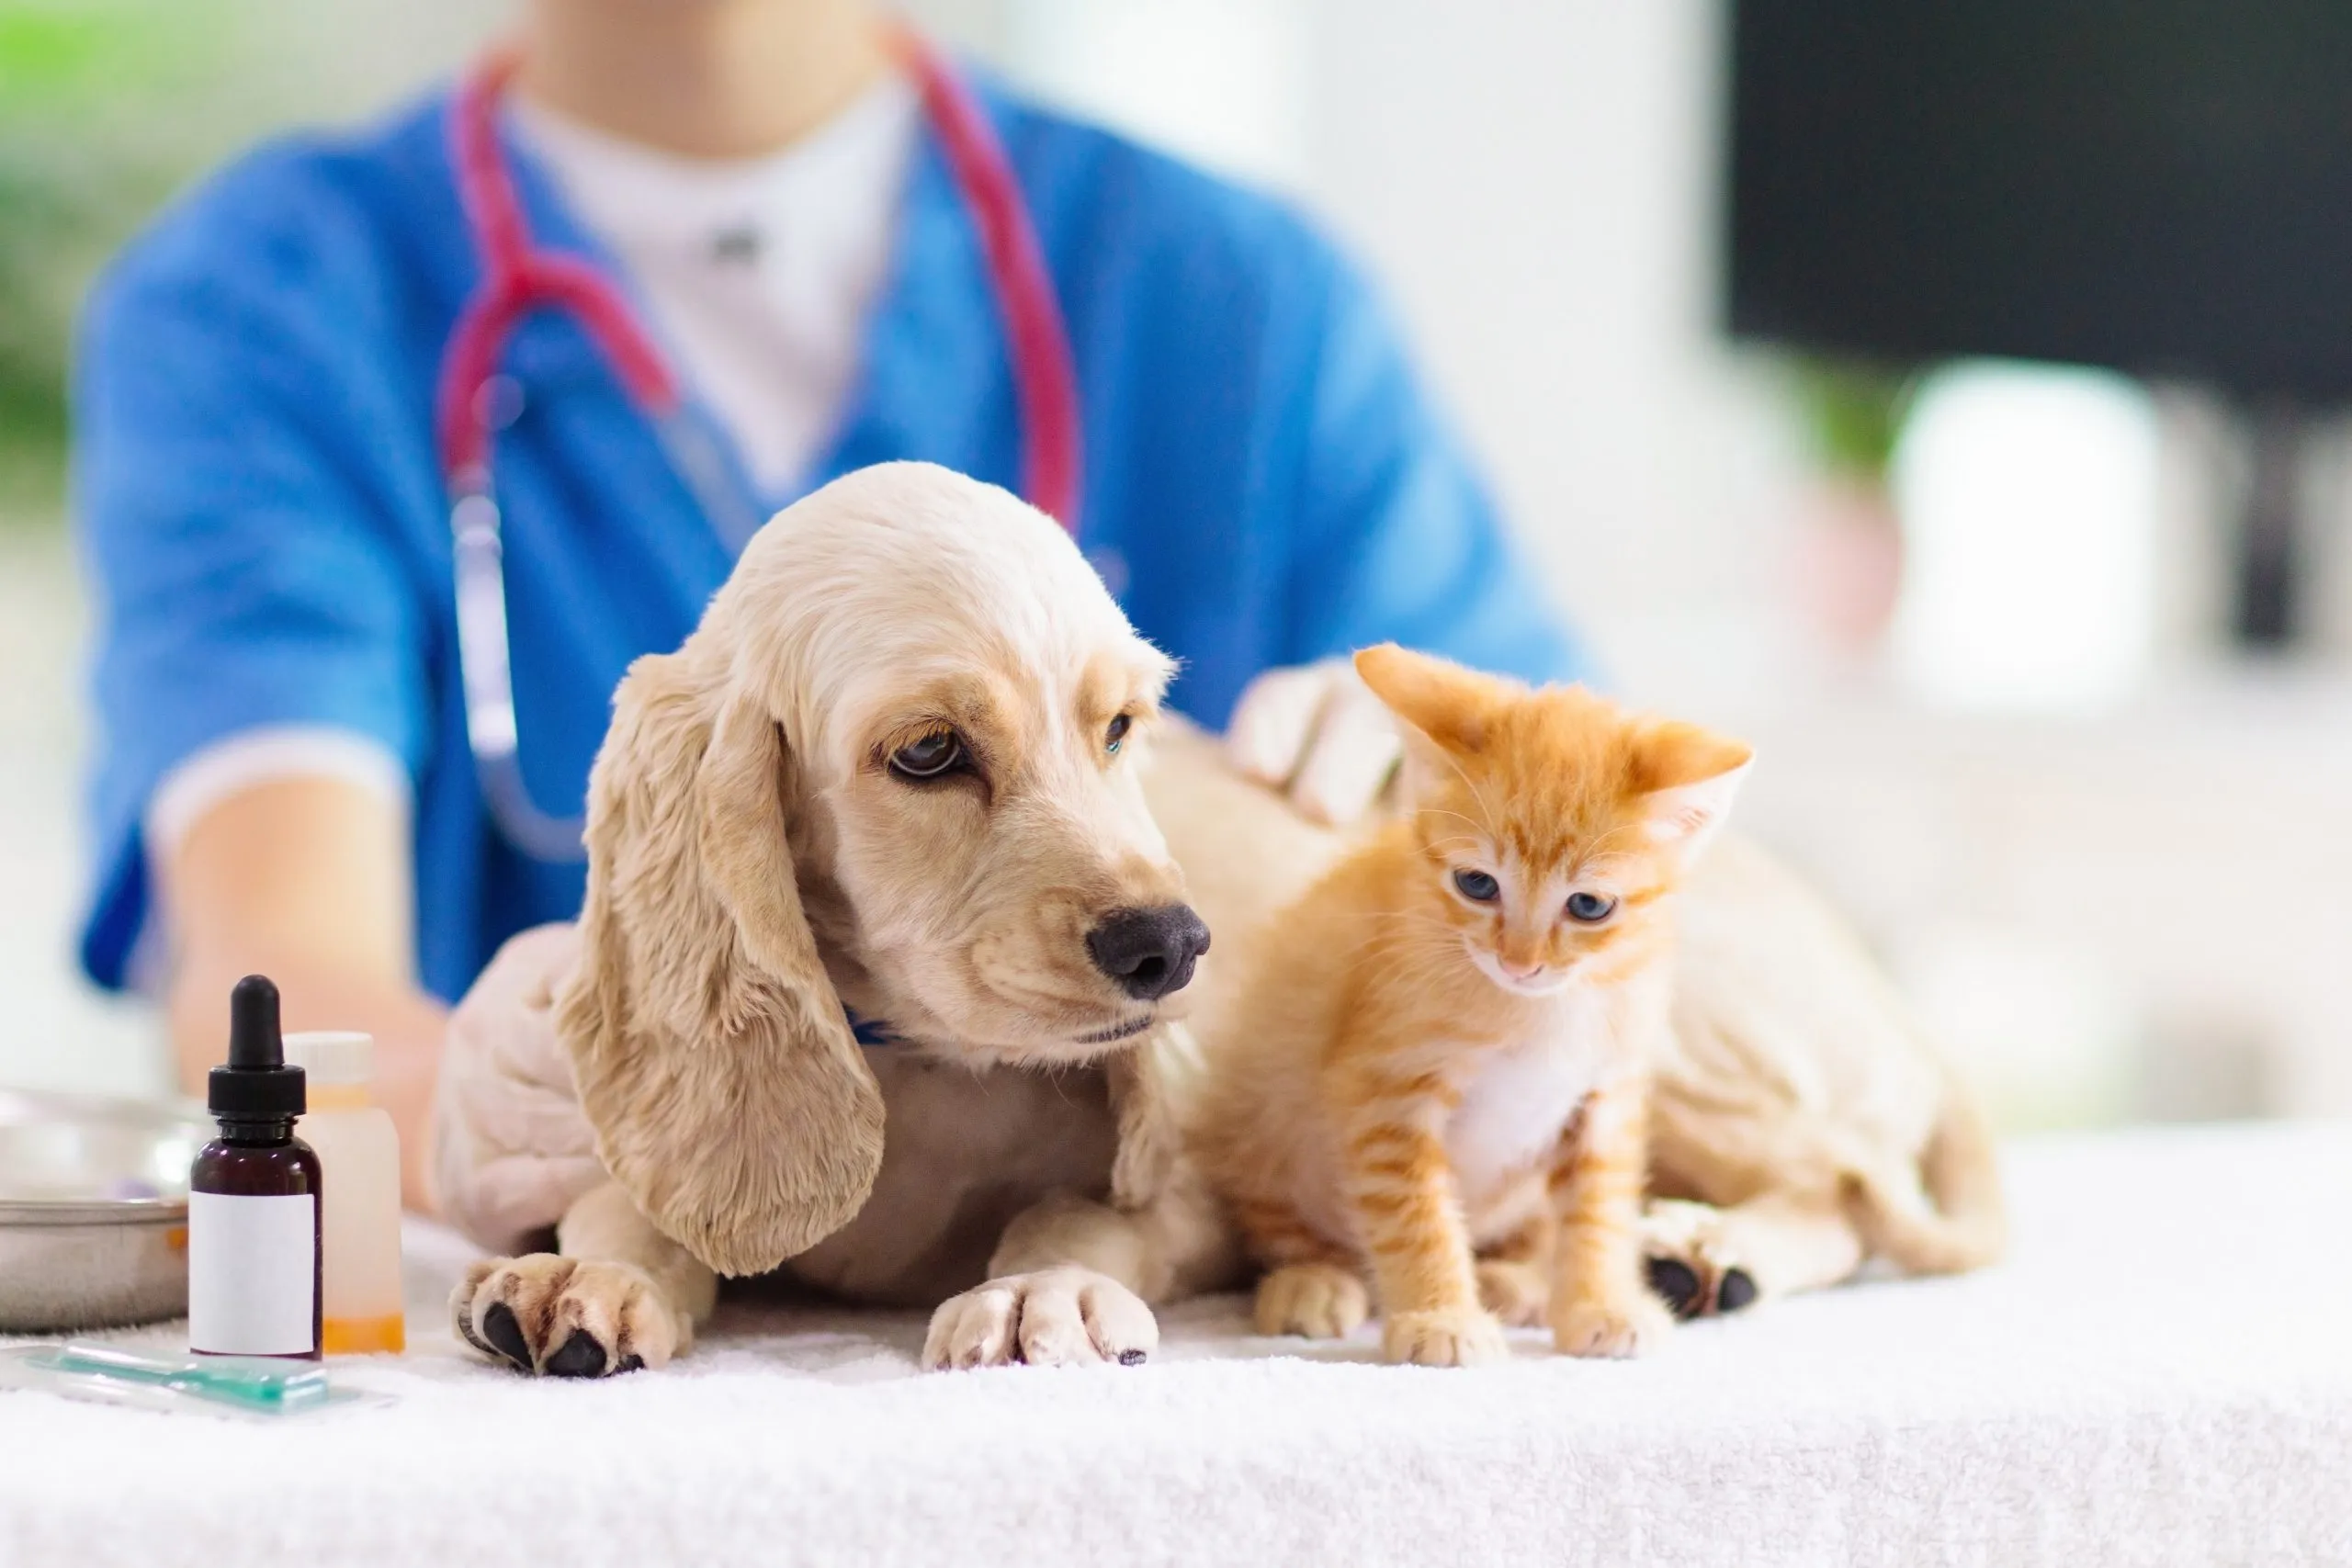 FREE HELP TO PAY DOG OR CAT SURGERY VET EXPENSES! EXPLORE 24 RELIABLE ORGANIZATIONS THAT CAN AID YOU